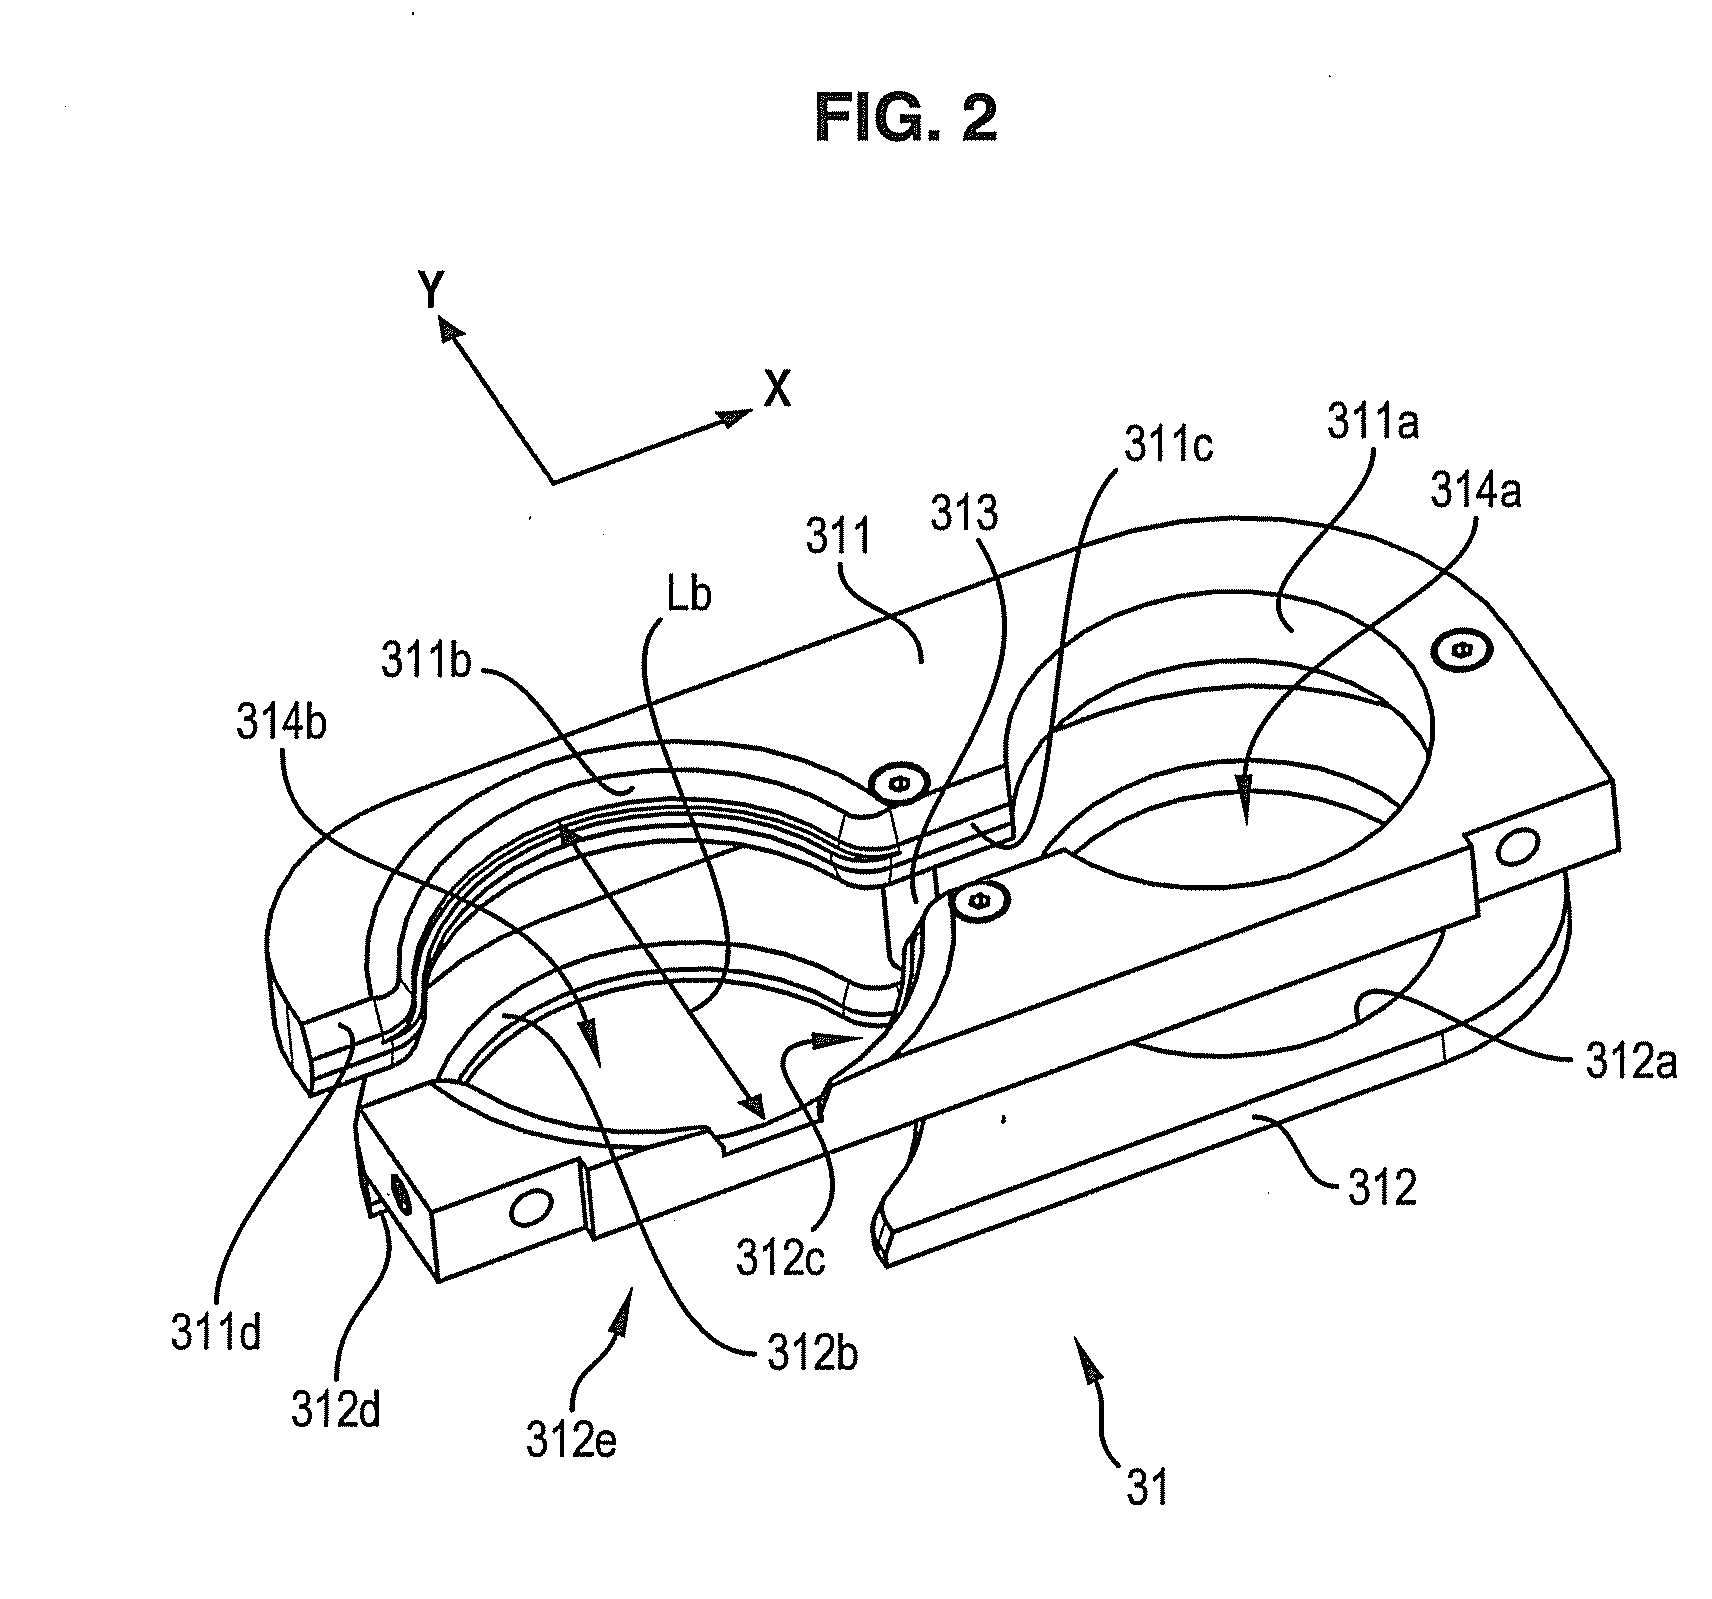 Device for dispensing a product in a petri dish